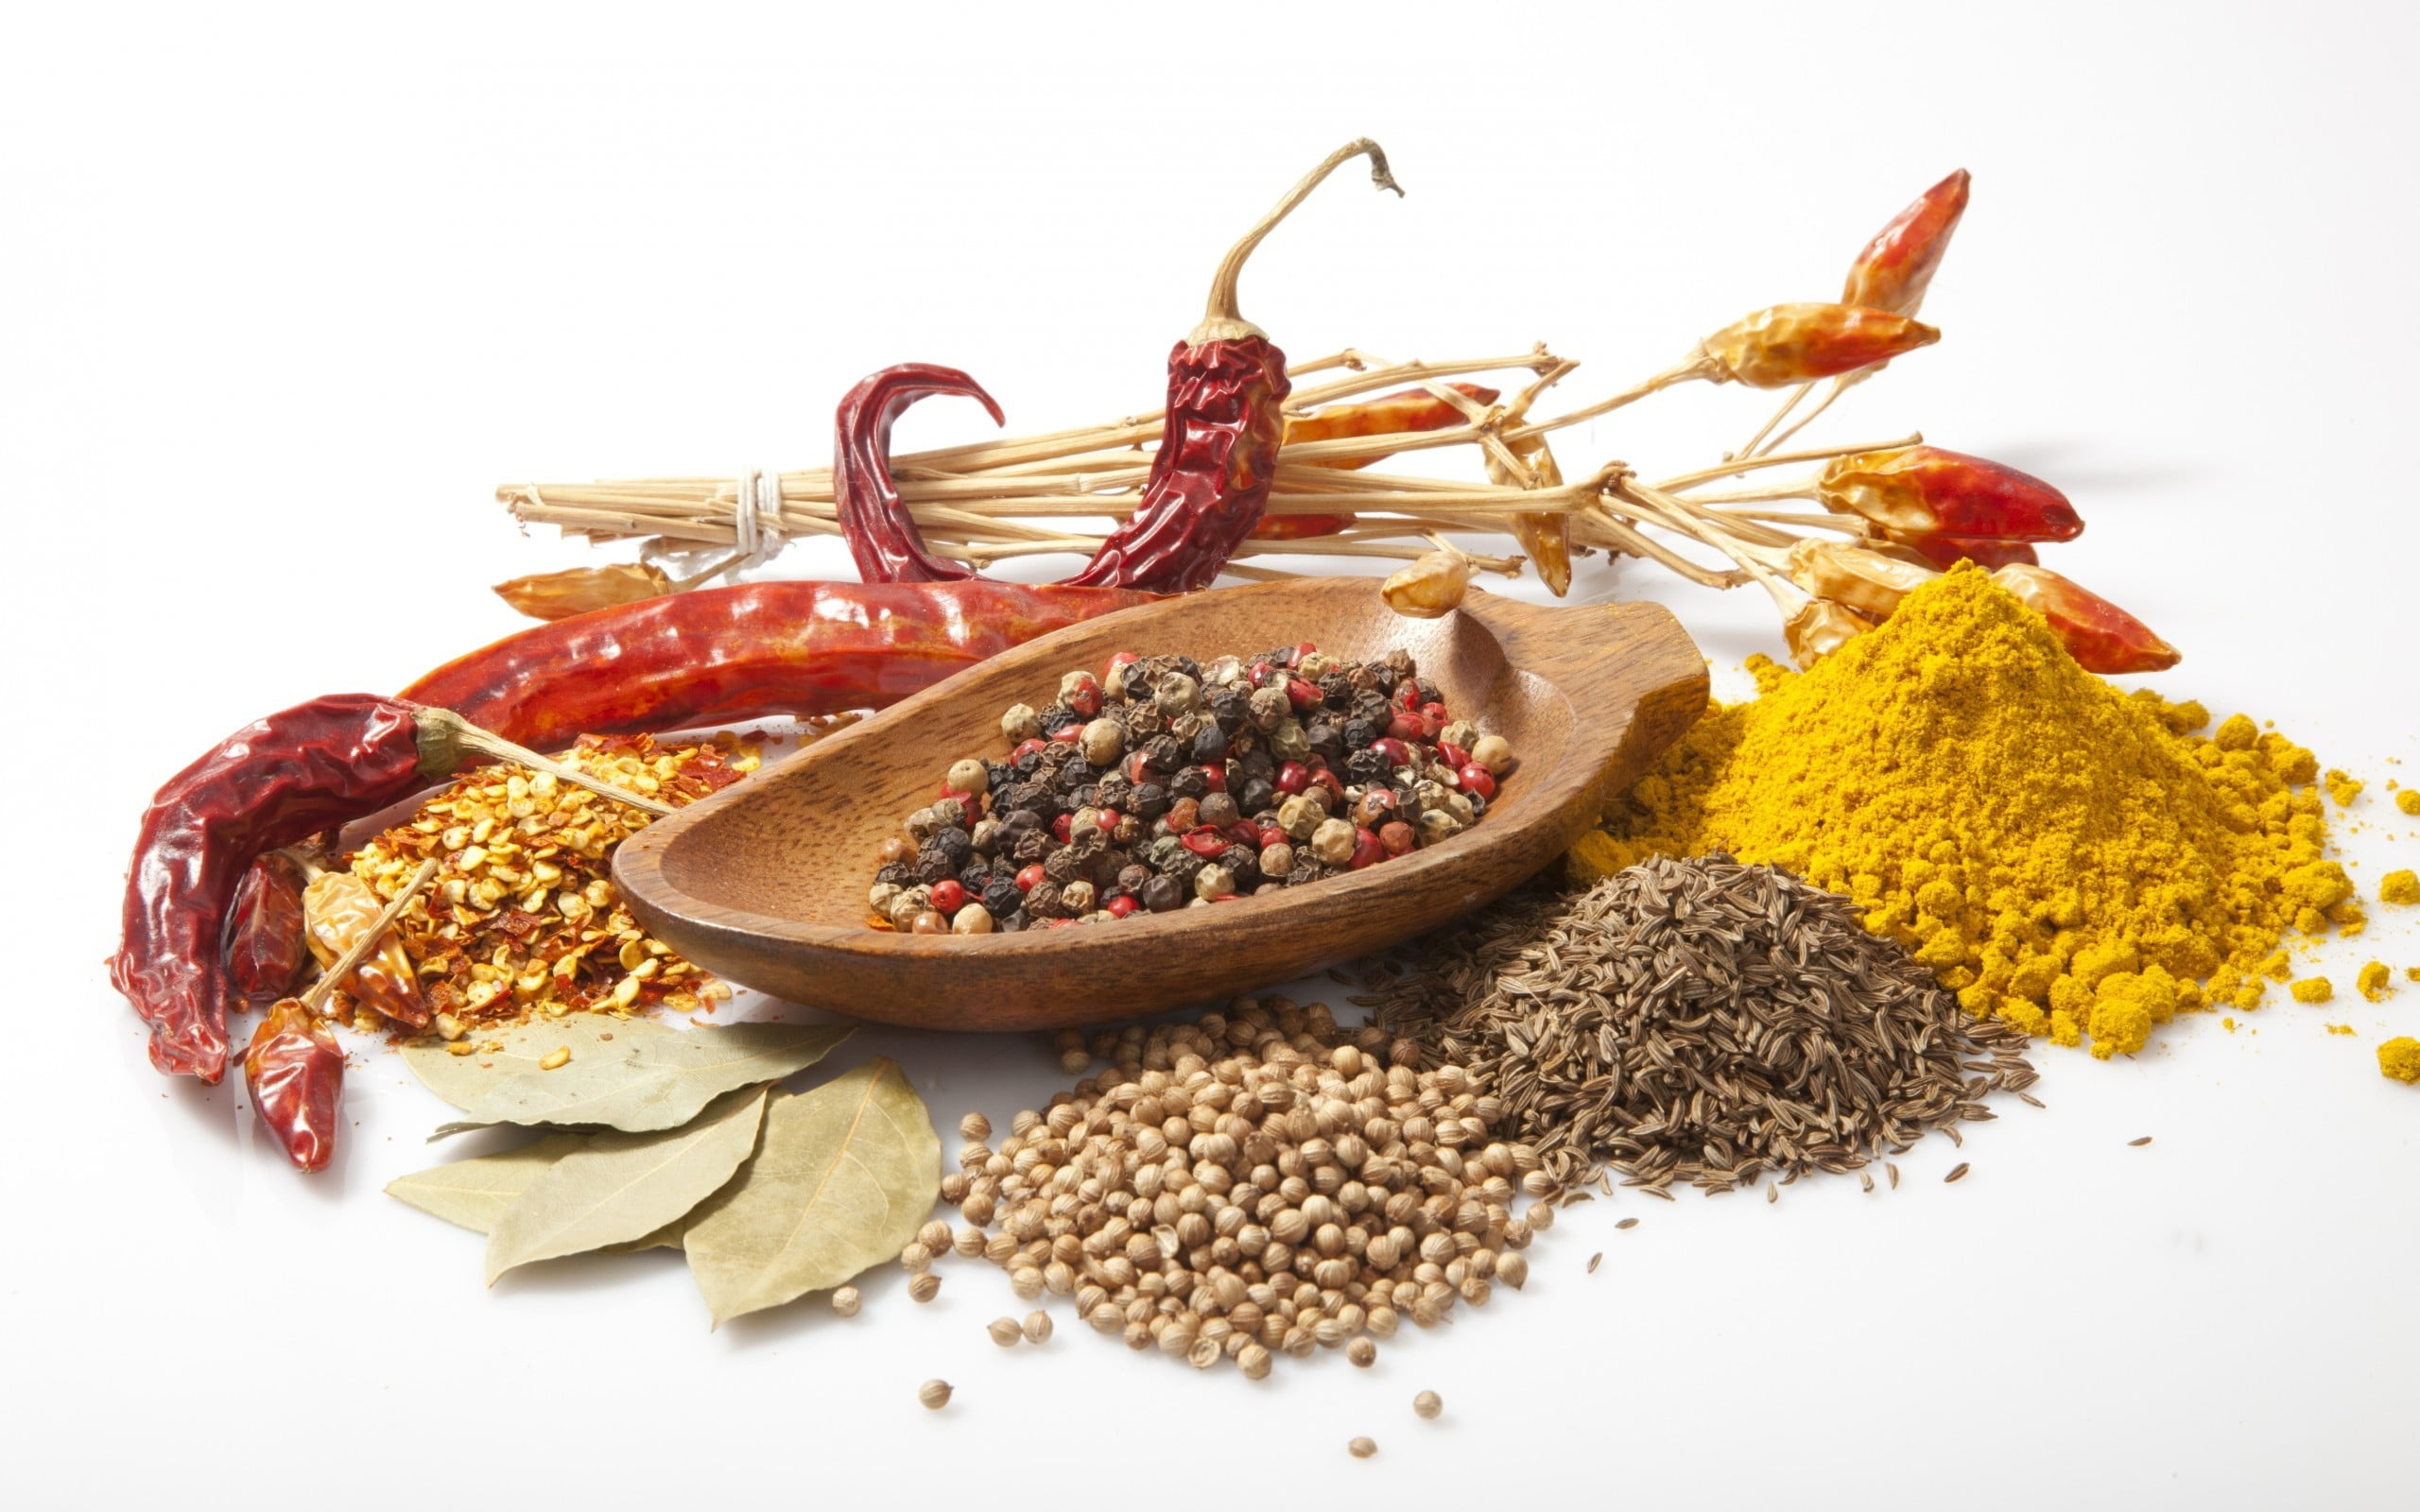 Assorted spices, HD wallpaper, Spiced flavor, Culinary delight, 2560x1600 HD Desktop